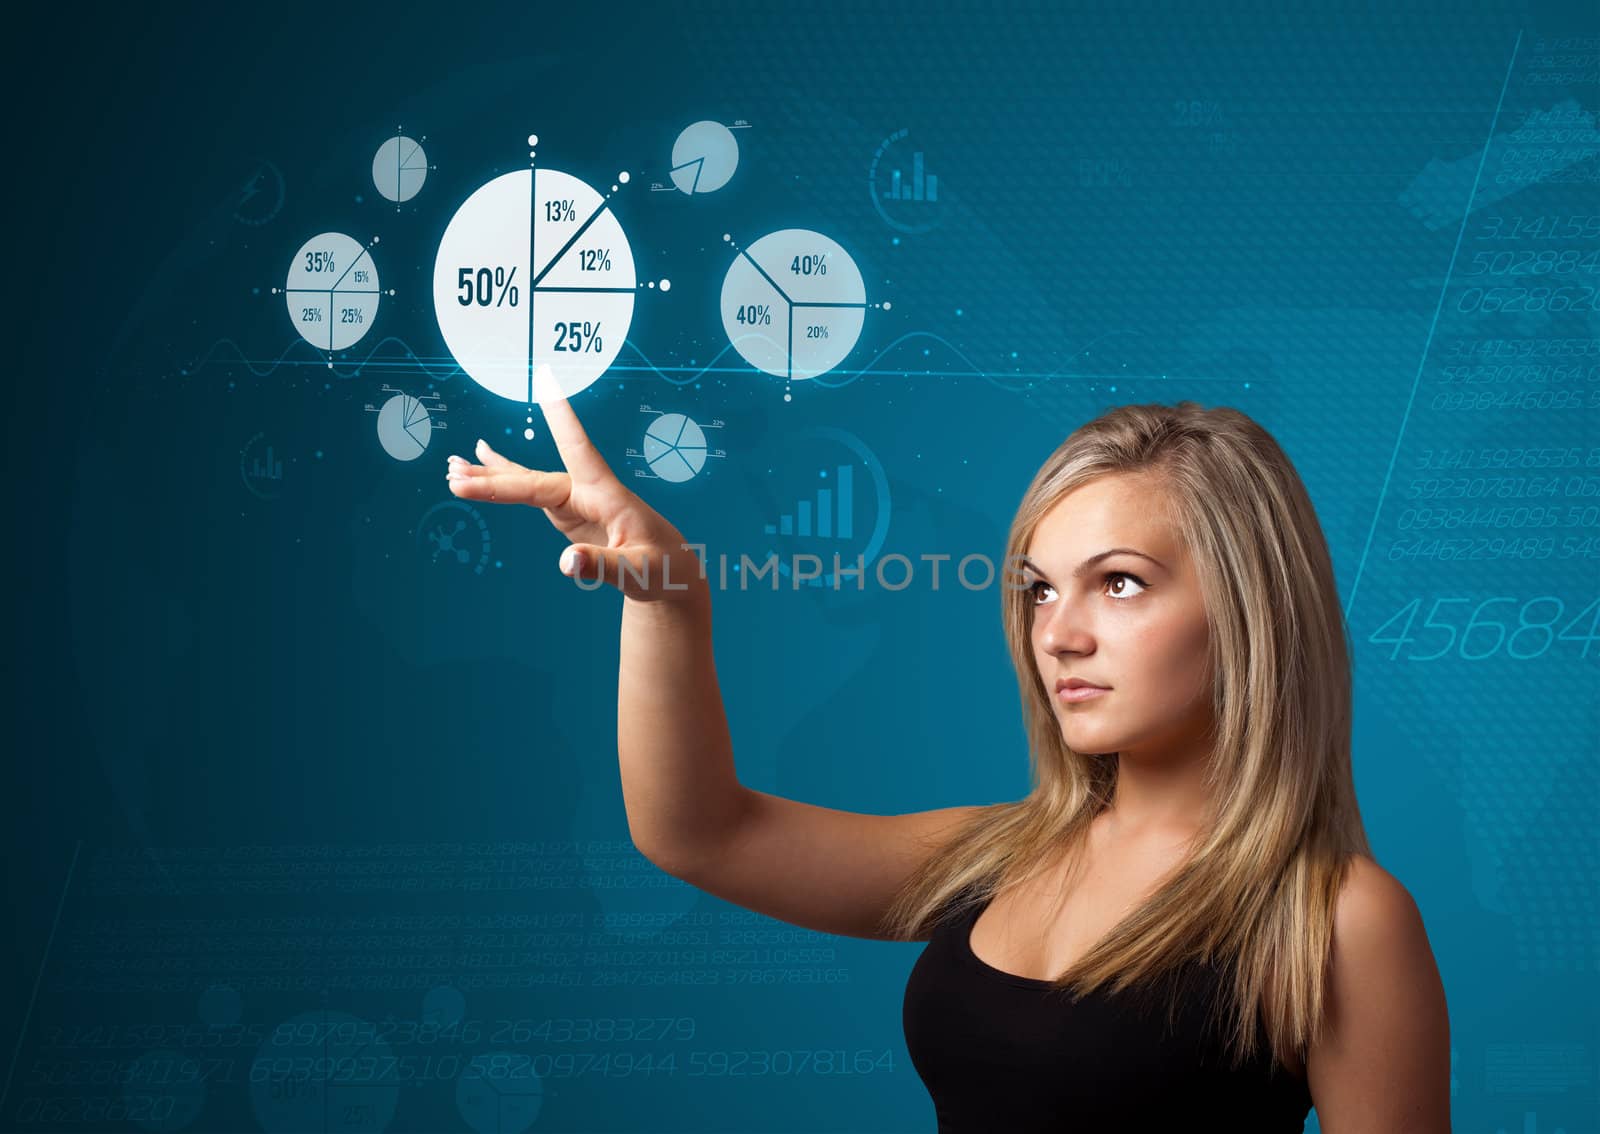 Businesswoman pressing business type of modern buttons with virtual background